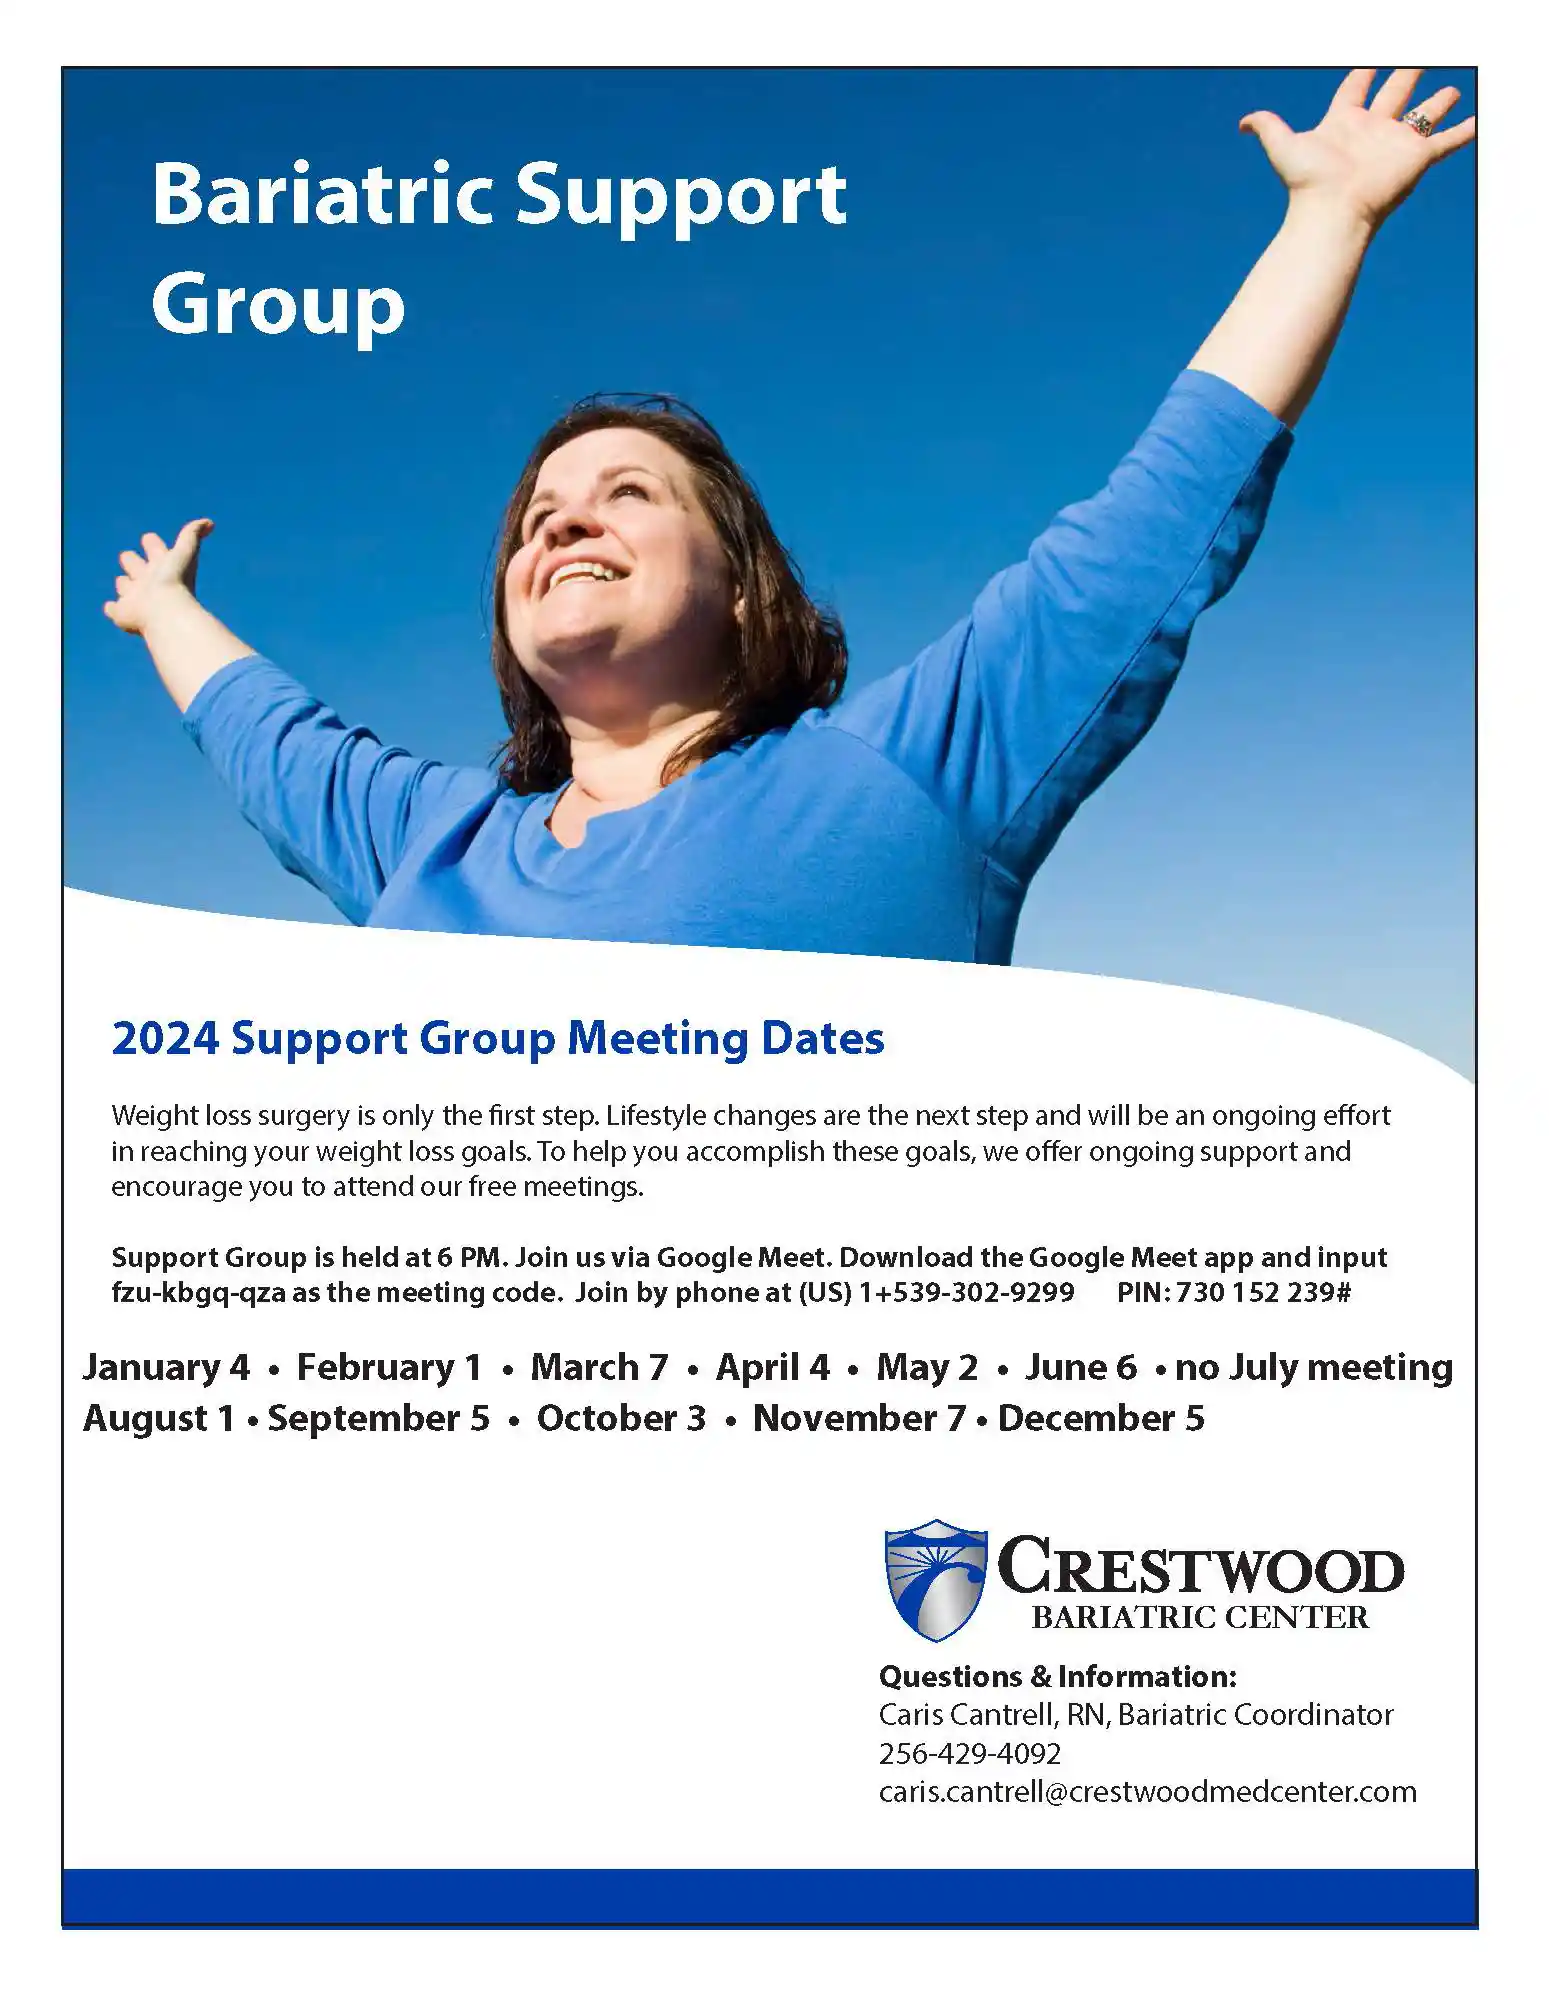 Bariatric Support Group flyer 2024